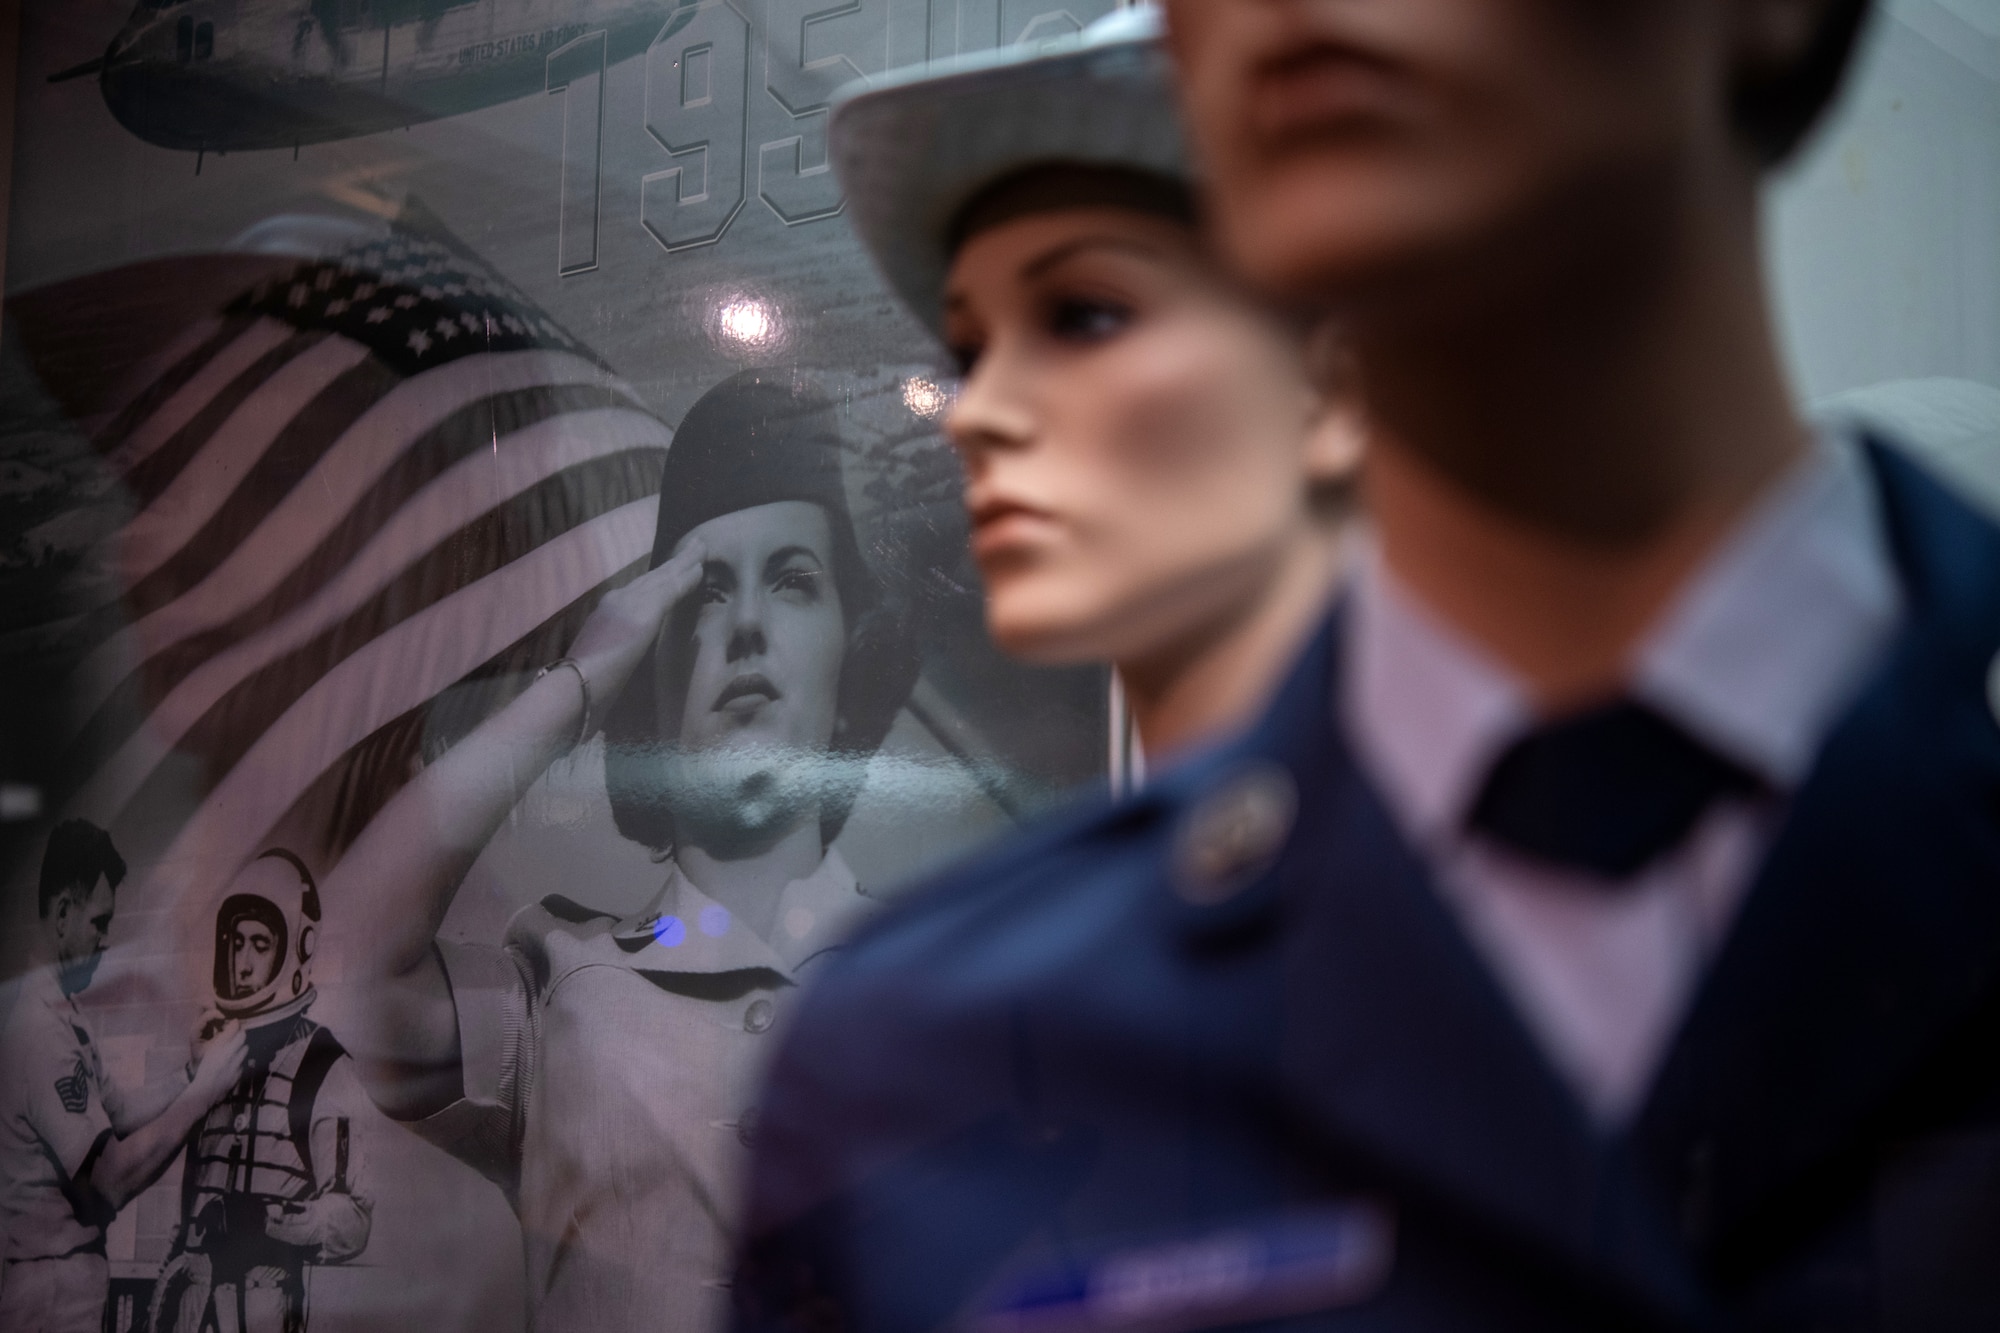 Artifacts from the Women in the Air Force gallery are displayed in the USAF Airman Heritage Training Complex, Aug. 10, 2020 at Joint Base San Antonio-Lackland, Texas. The Airman Heritage Museum collects, researches, preserves, interprets and presents the USAF Enlisted Corps history, heritage, and traditions to develop Airmen today and for tomorrow.  (U.S. Air Force photo by Sarayuth Pinthong)